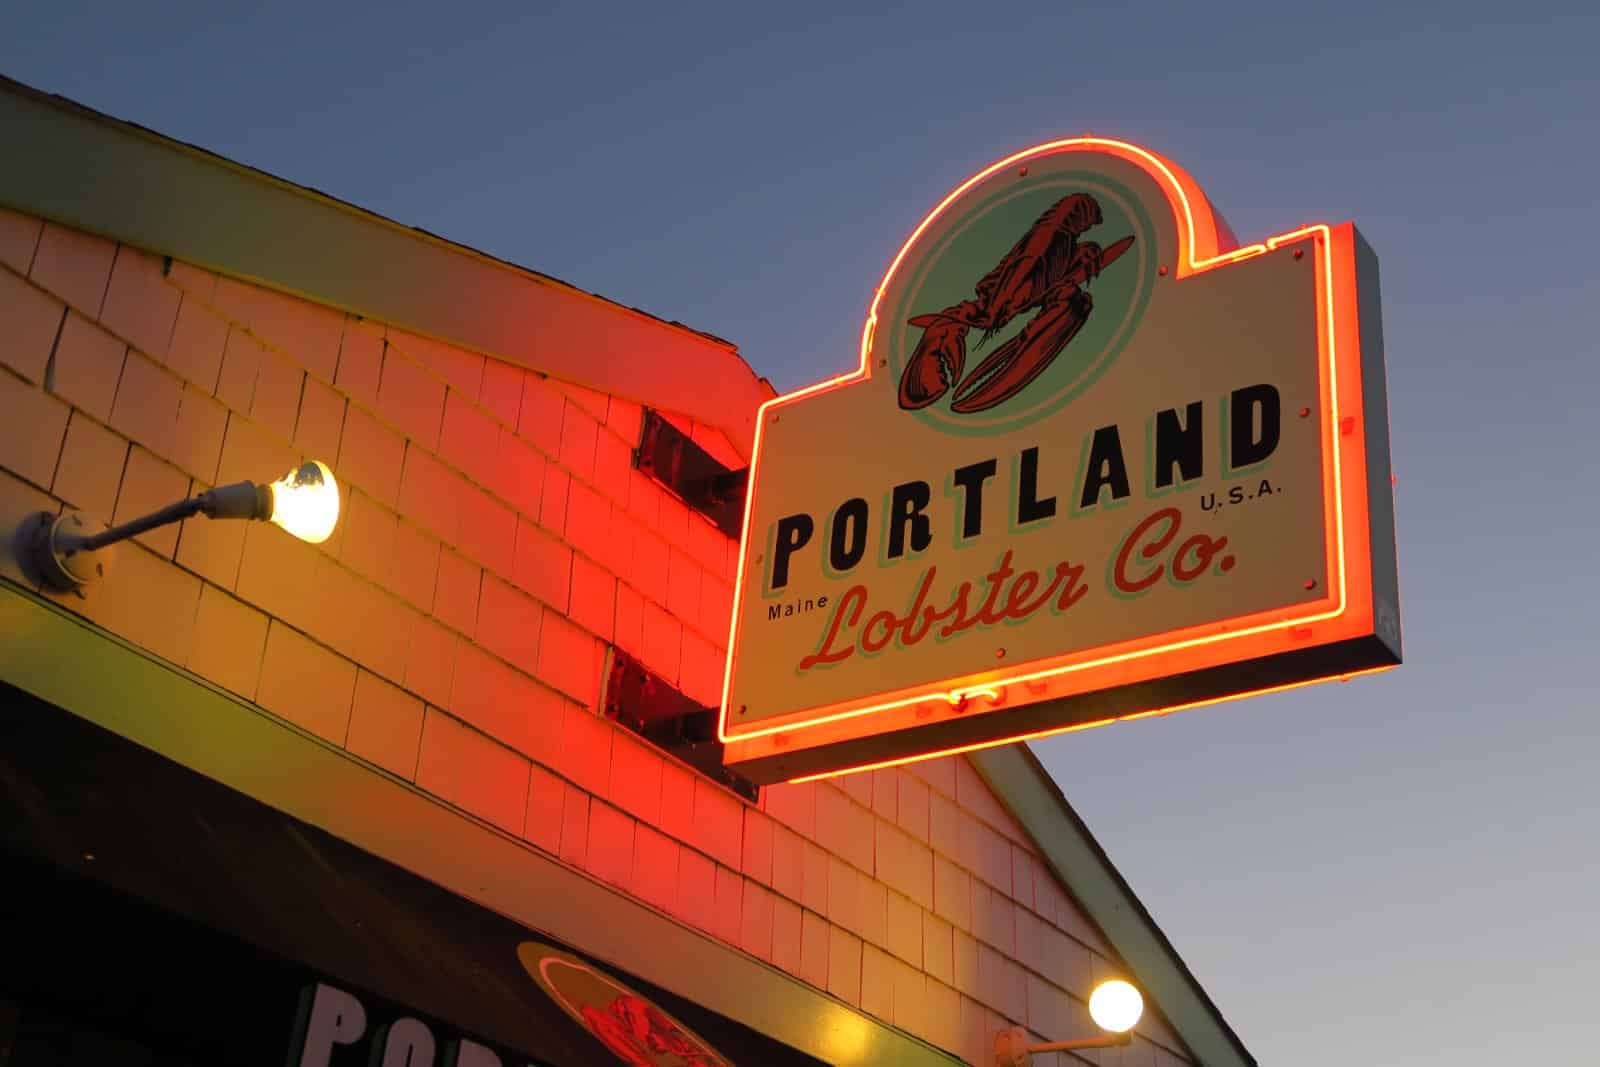 <p class="wp-caption-text">Image Credit: Shutterstock / Dav Himbt.</p>  <p>Indulge in Portland’s foodie scene, where lobster rolls meet craft brews and everything in between. High-end dining experiences and casual seafood shacks coexist, catering to every taste and budget.</p>